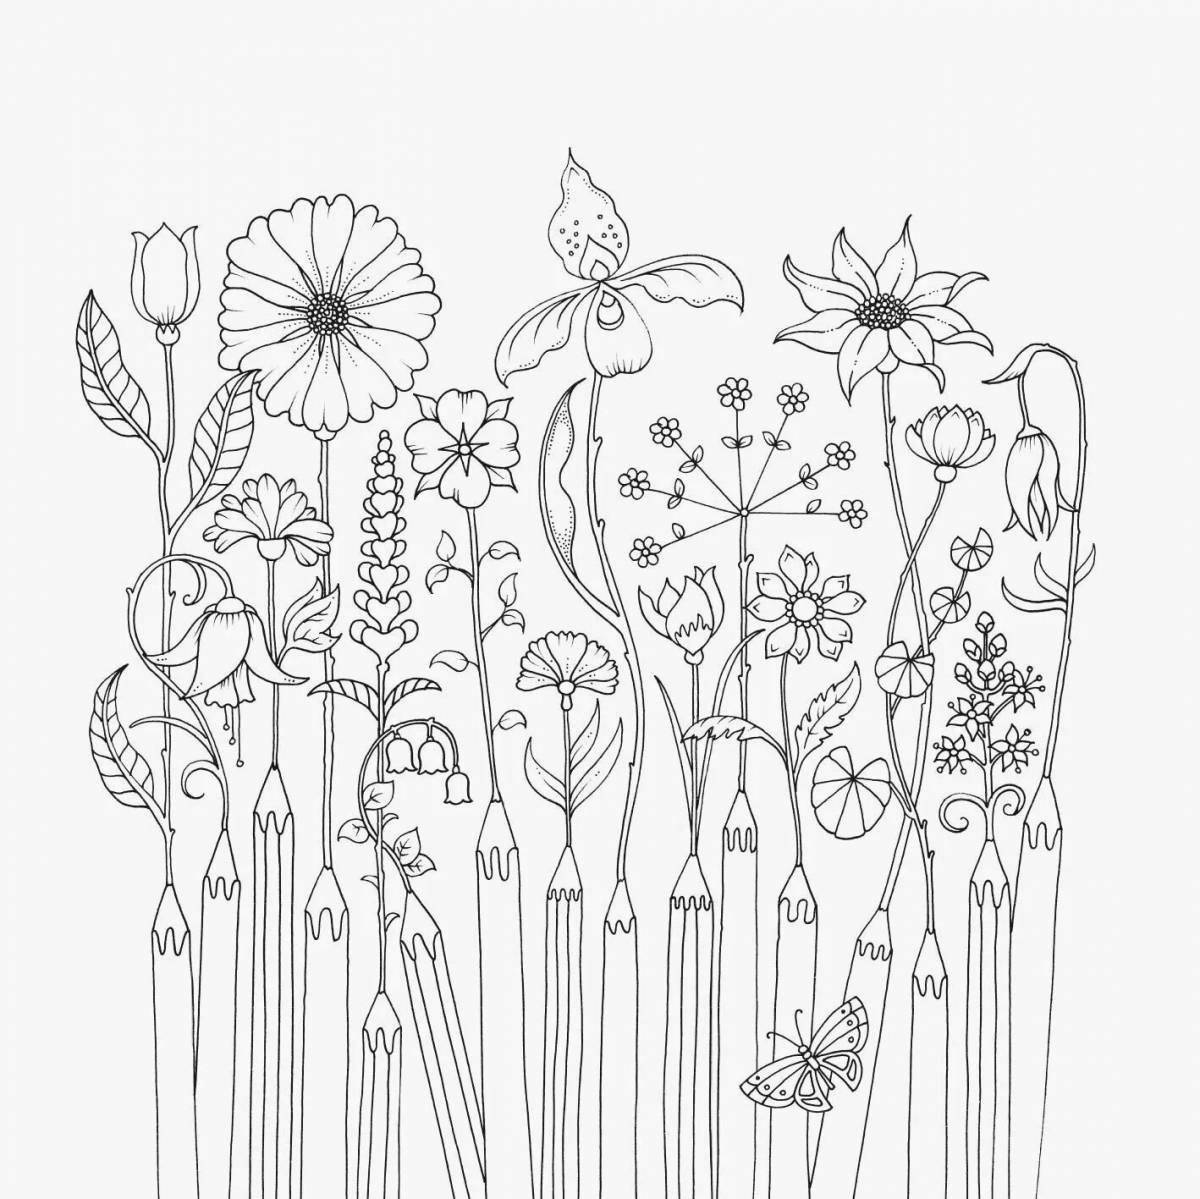 Inspiring coloring book flower mood relax